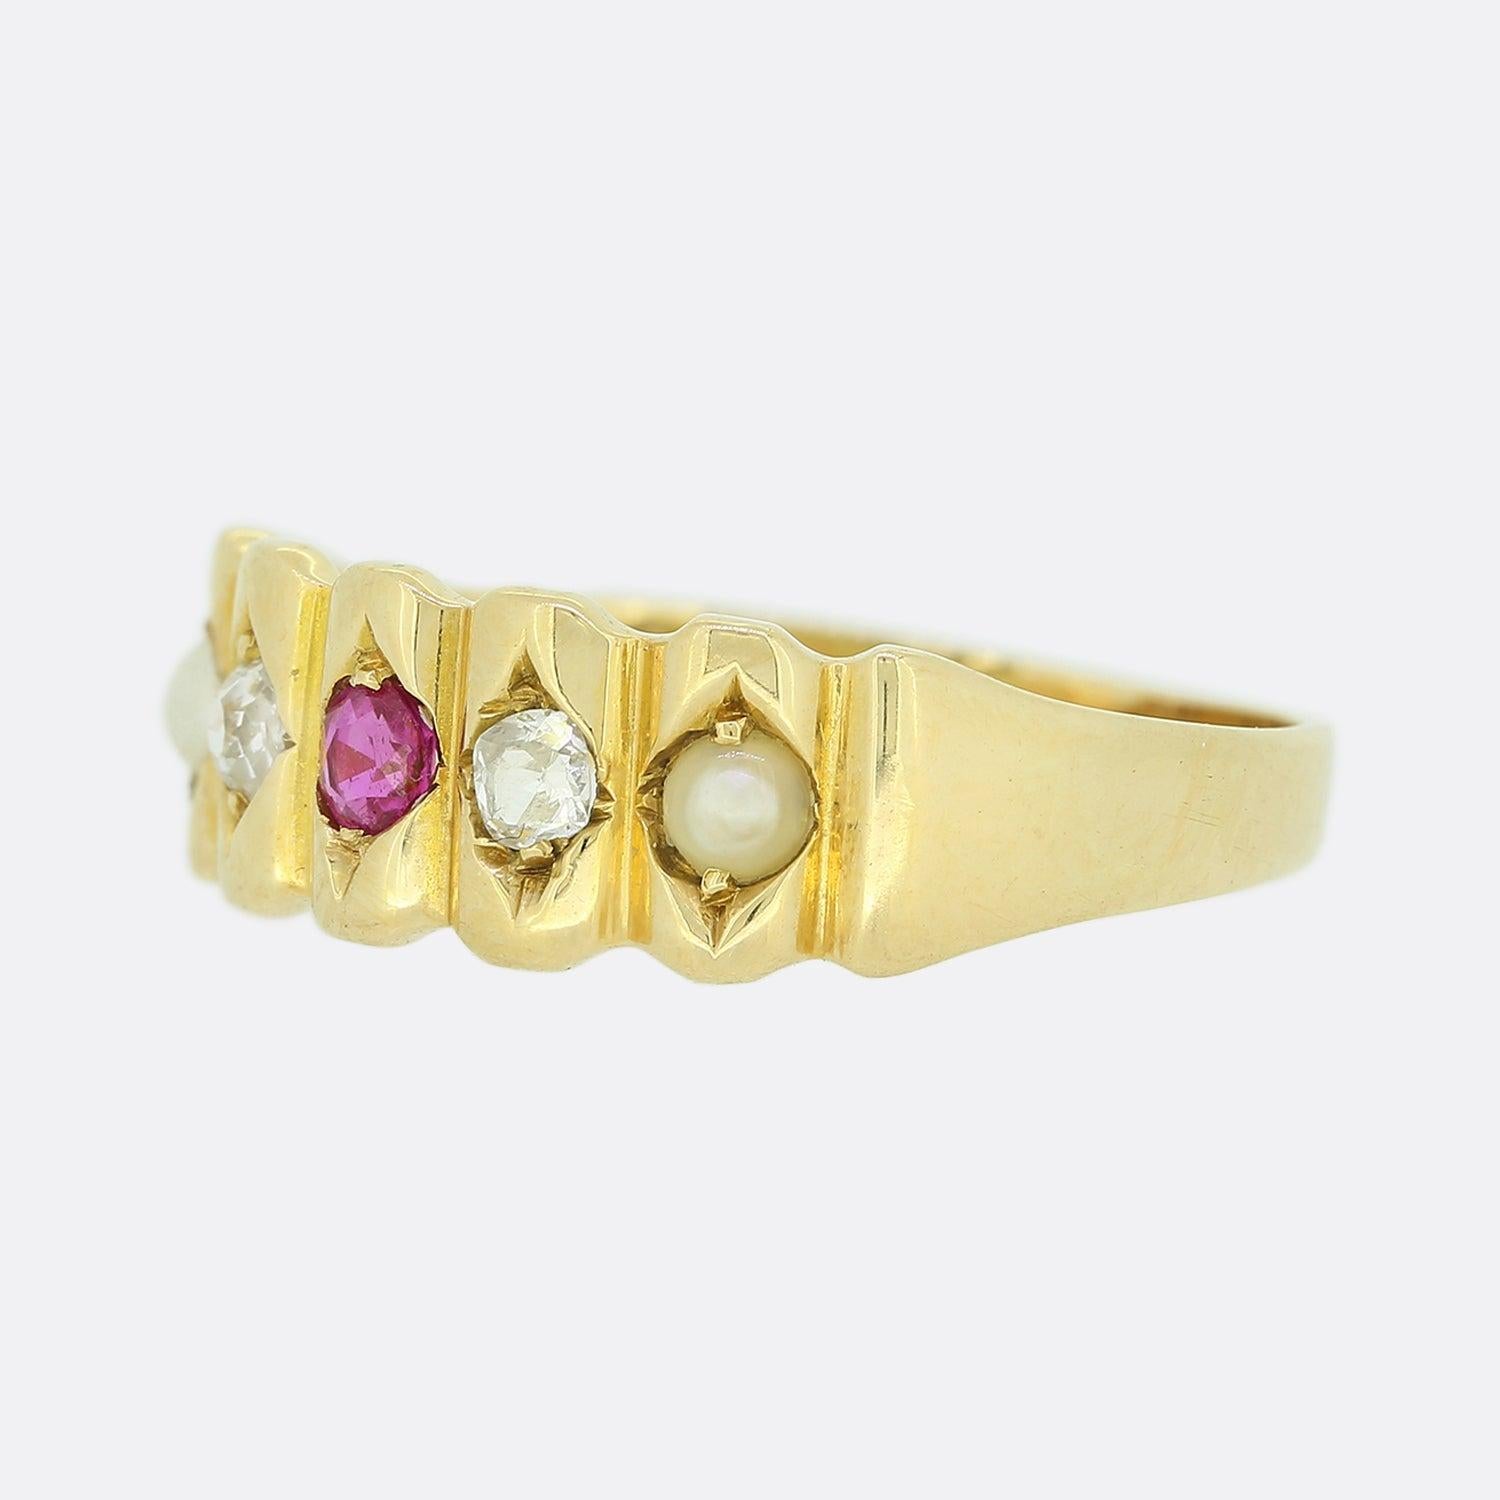 This is an antique 18ct yellow gold ruby, pearl and diamond ring from the Victorian era. The ring features a neatly detailed  jagged face with an array of individually claw set gemstones in a line formation including a single Burmese ruby, a pair of